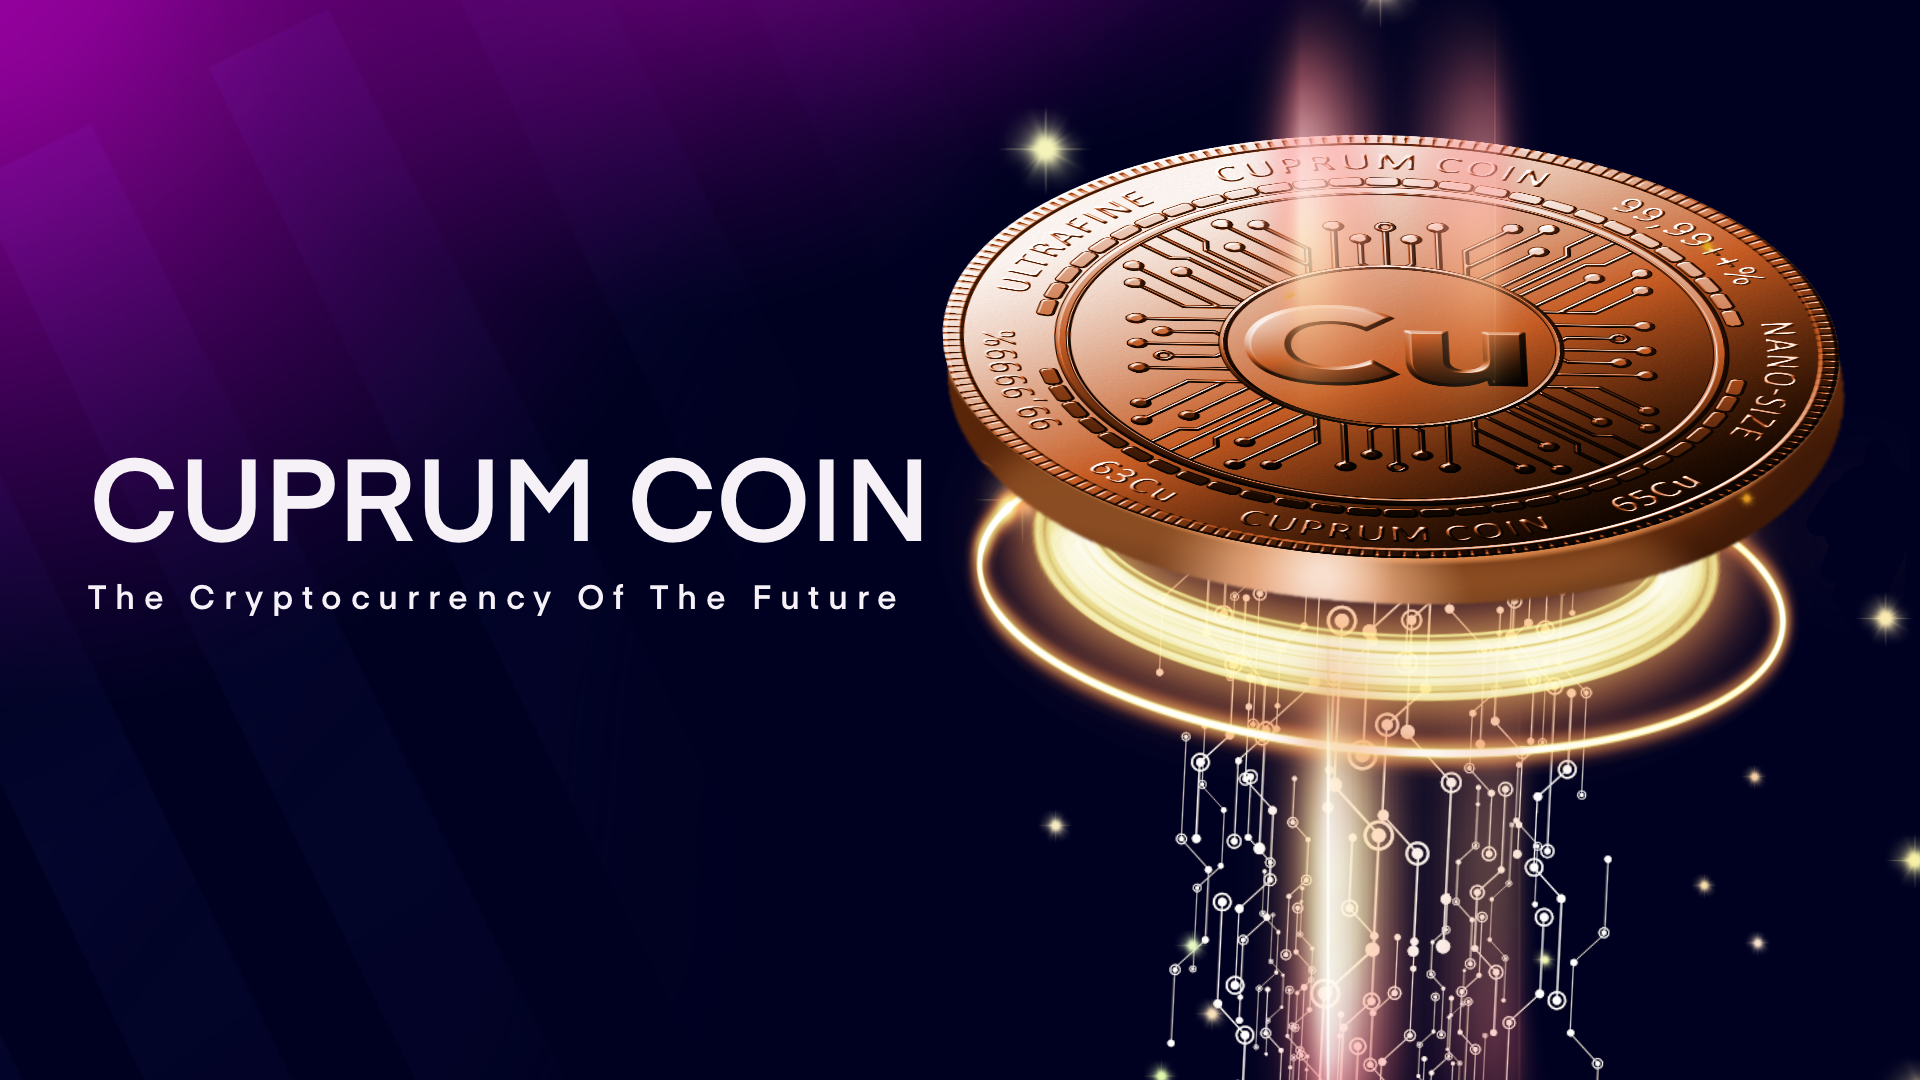 Cuprum Coin «CUC»: The cryptocurrency of the future is attracting huge interest from crypto investors